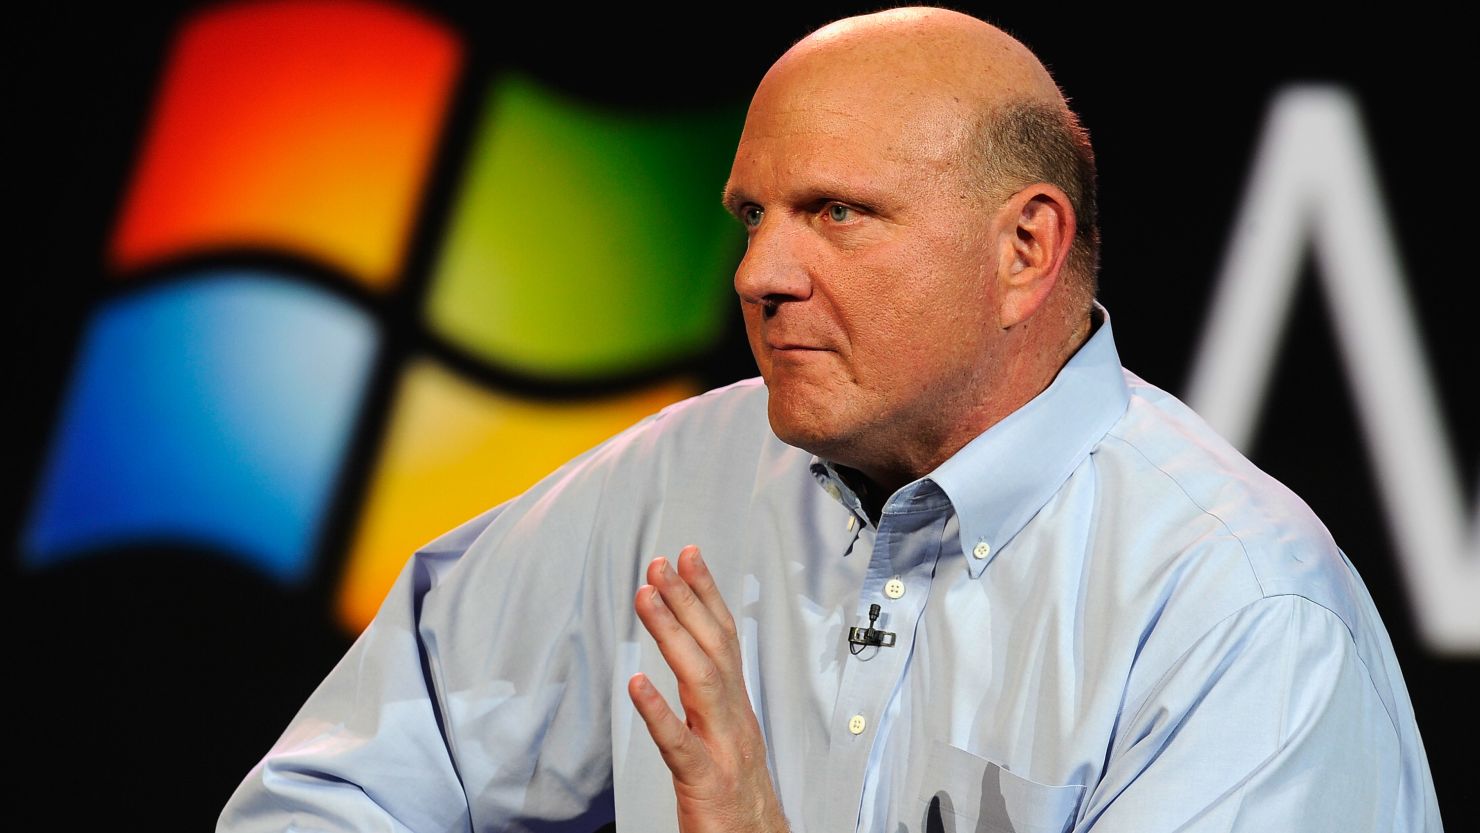 Microsoft's new Outlook e-mail service may be a hit. But CEO Steve Ballmer has an e-mail address problem.